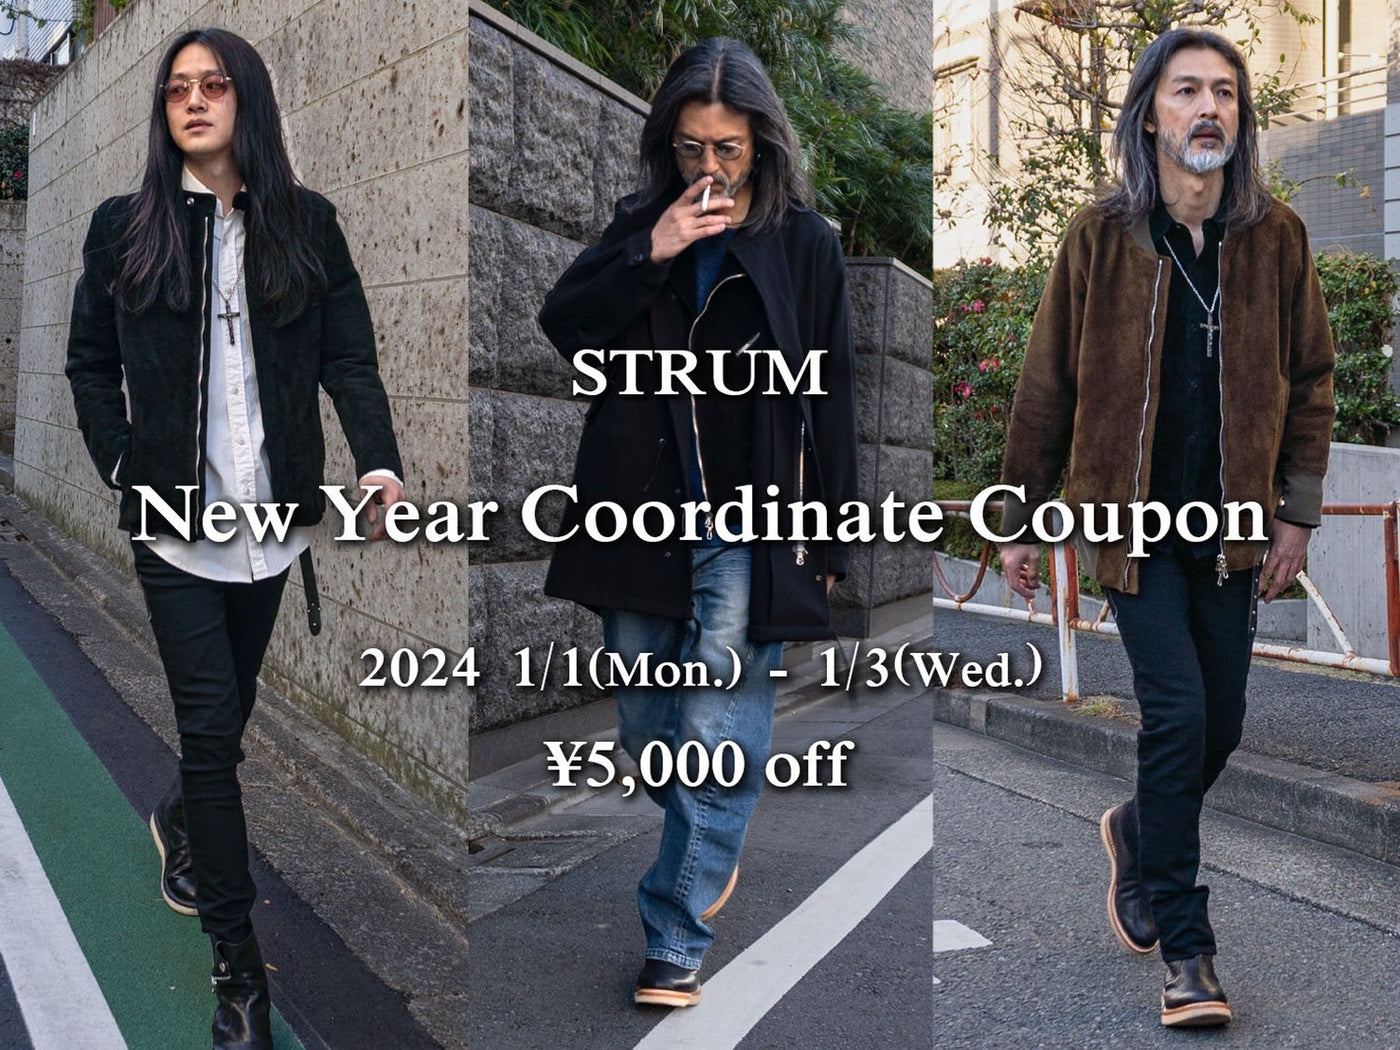 NEW YEAR COORDINATE COUPON